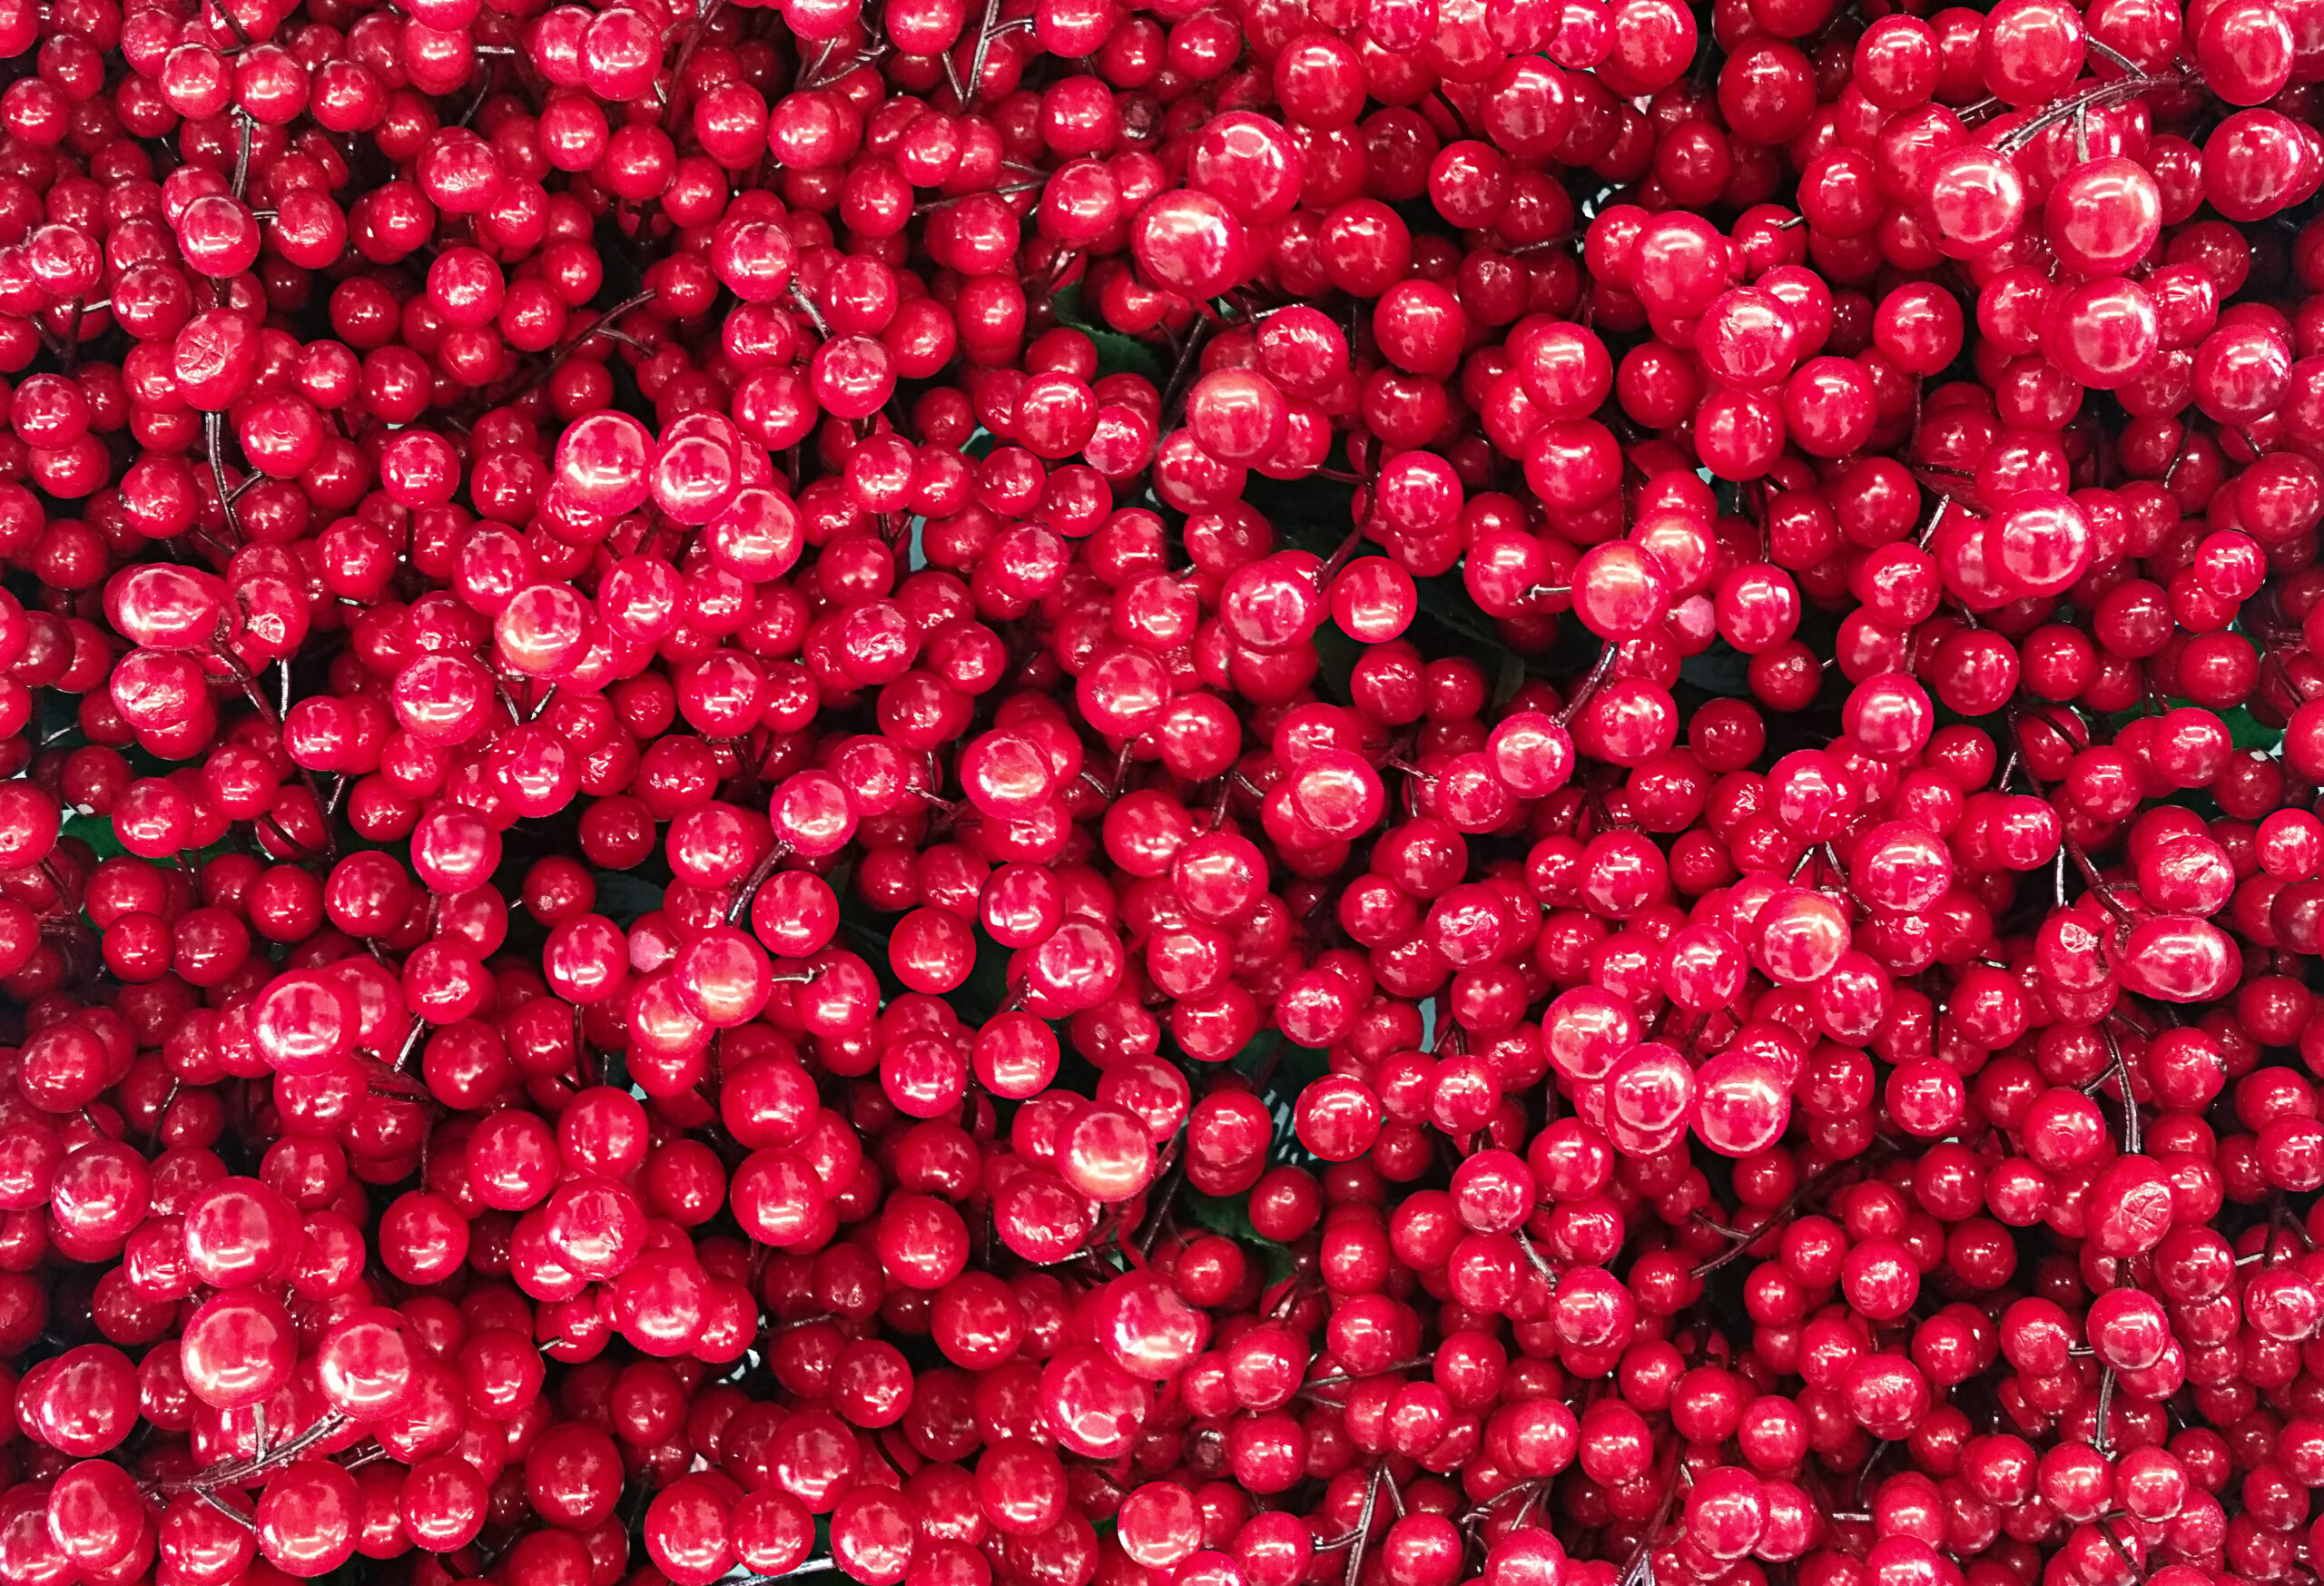 Urinary Infections (Cystitis) and the Benefits of Cranberry Titrate